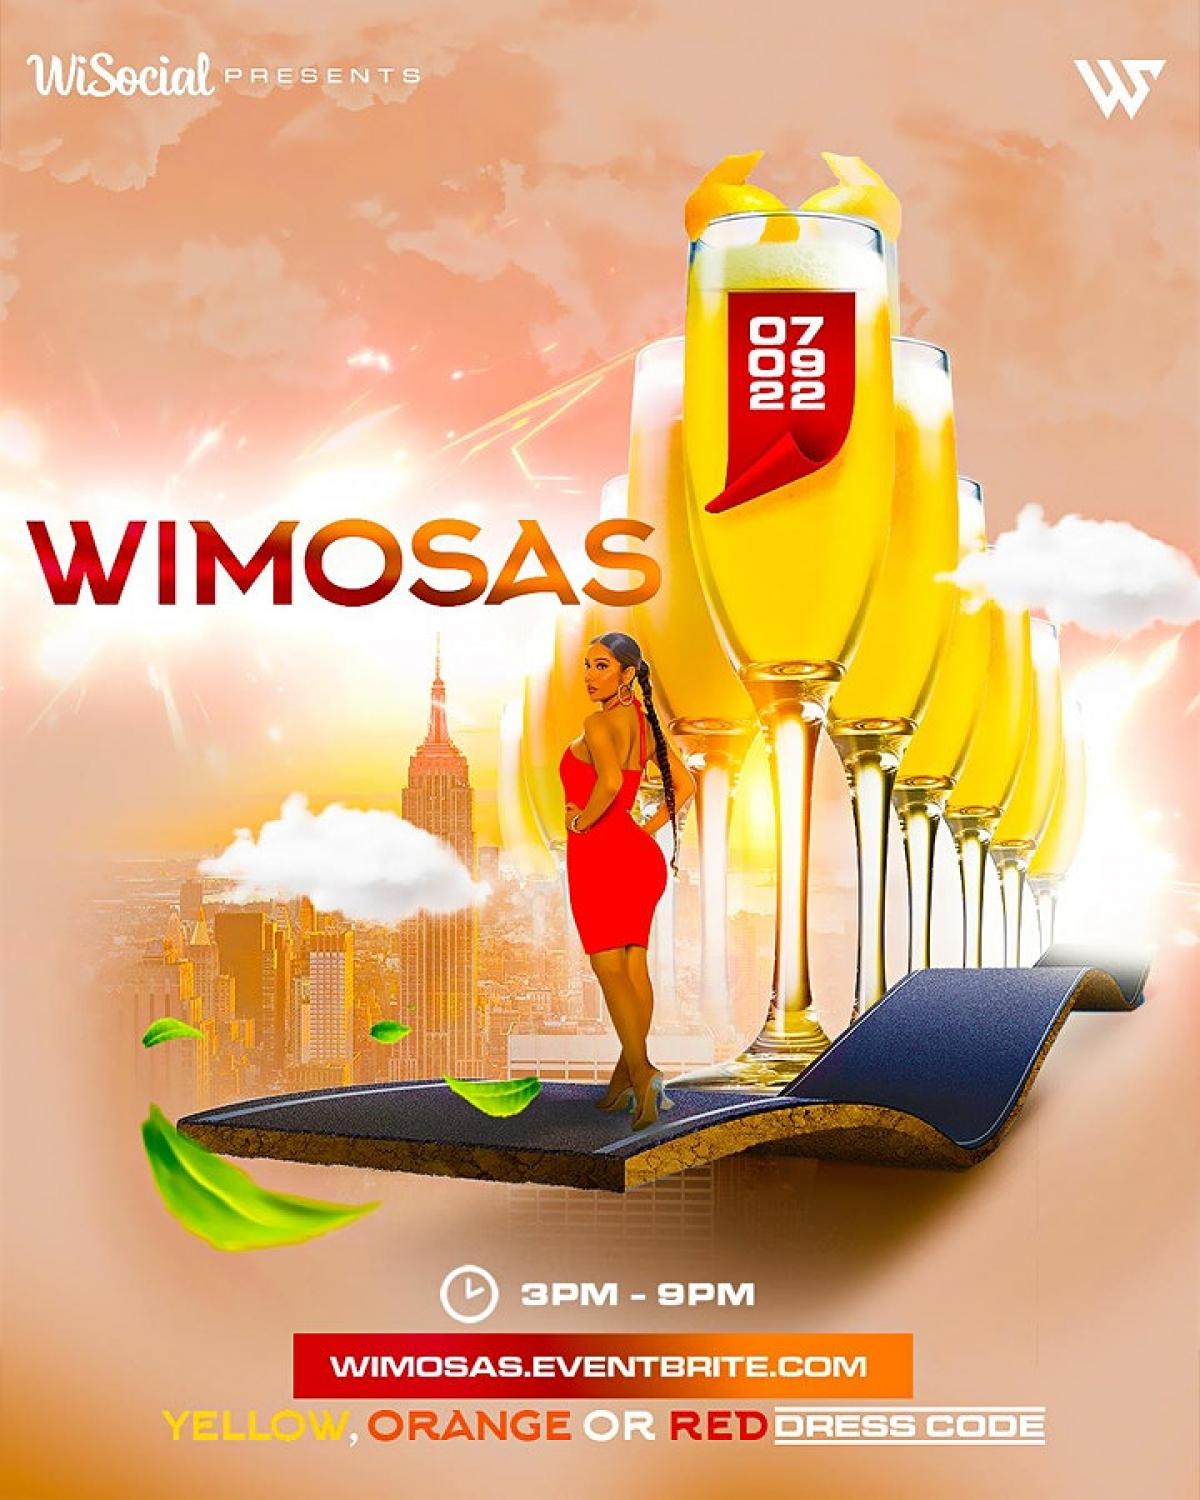 WiMosas  flyer or graphic.